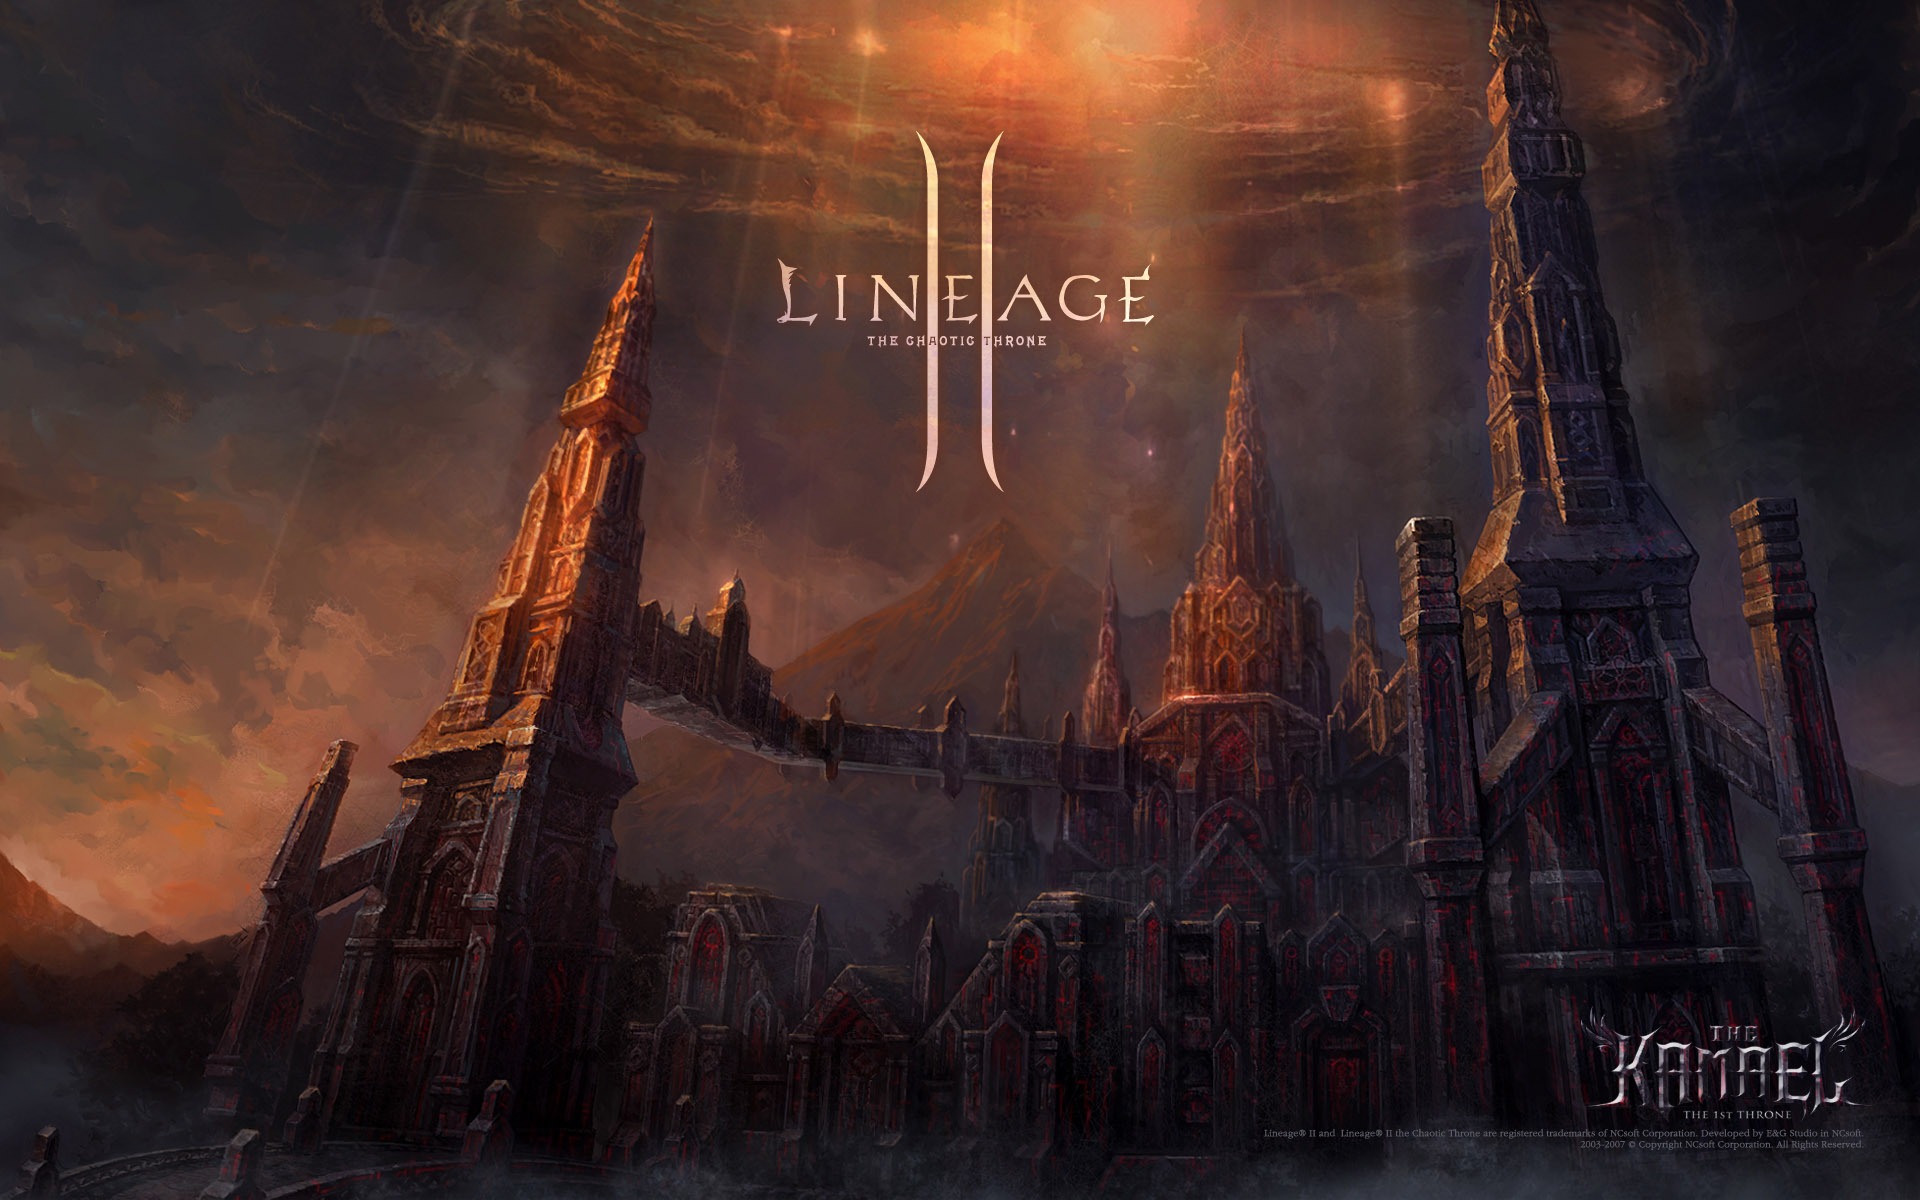 LINEAGE Ⅱ modeling HD gaming wallpapers #4 - 1920x1200